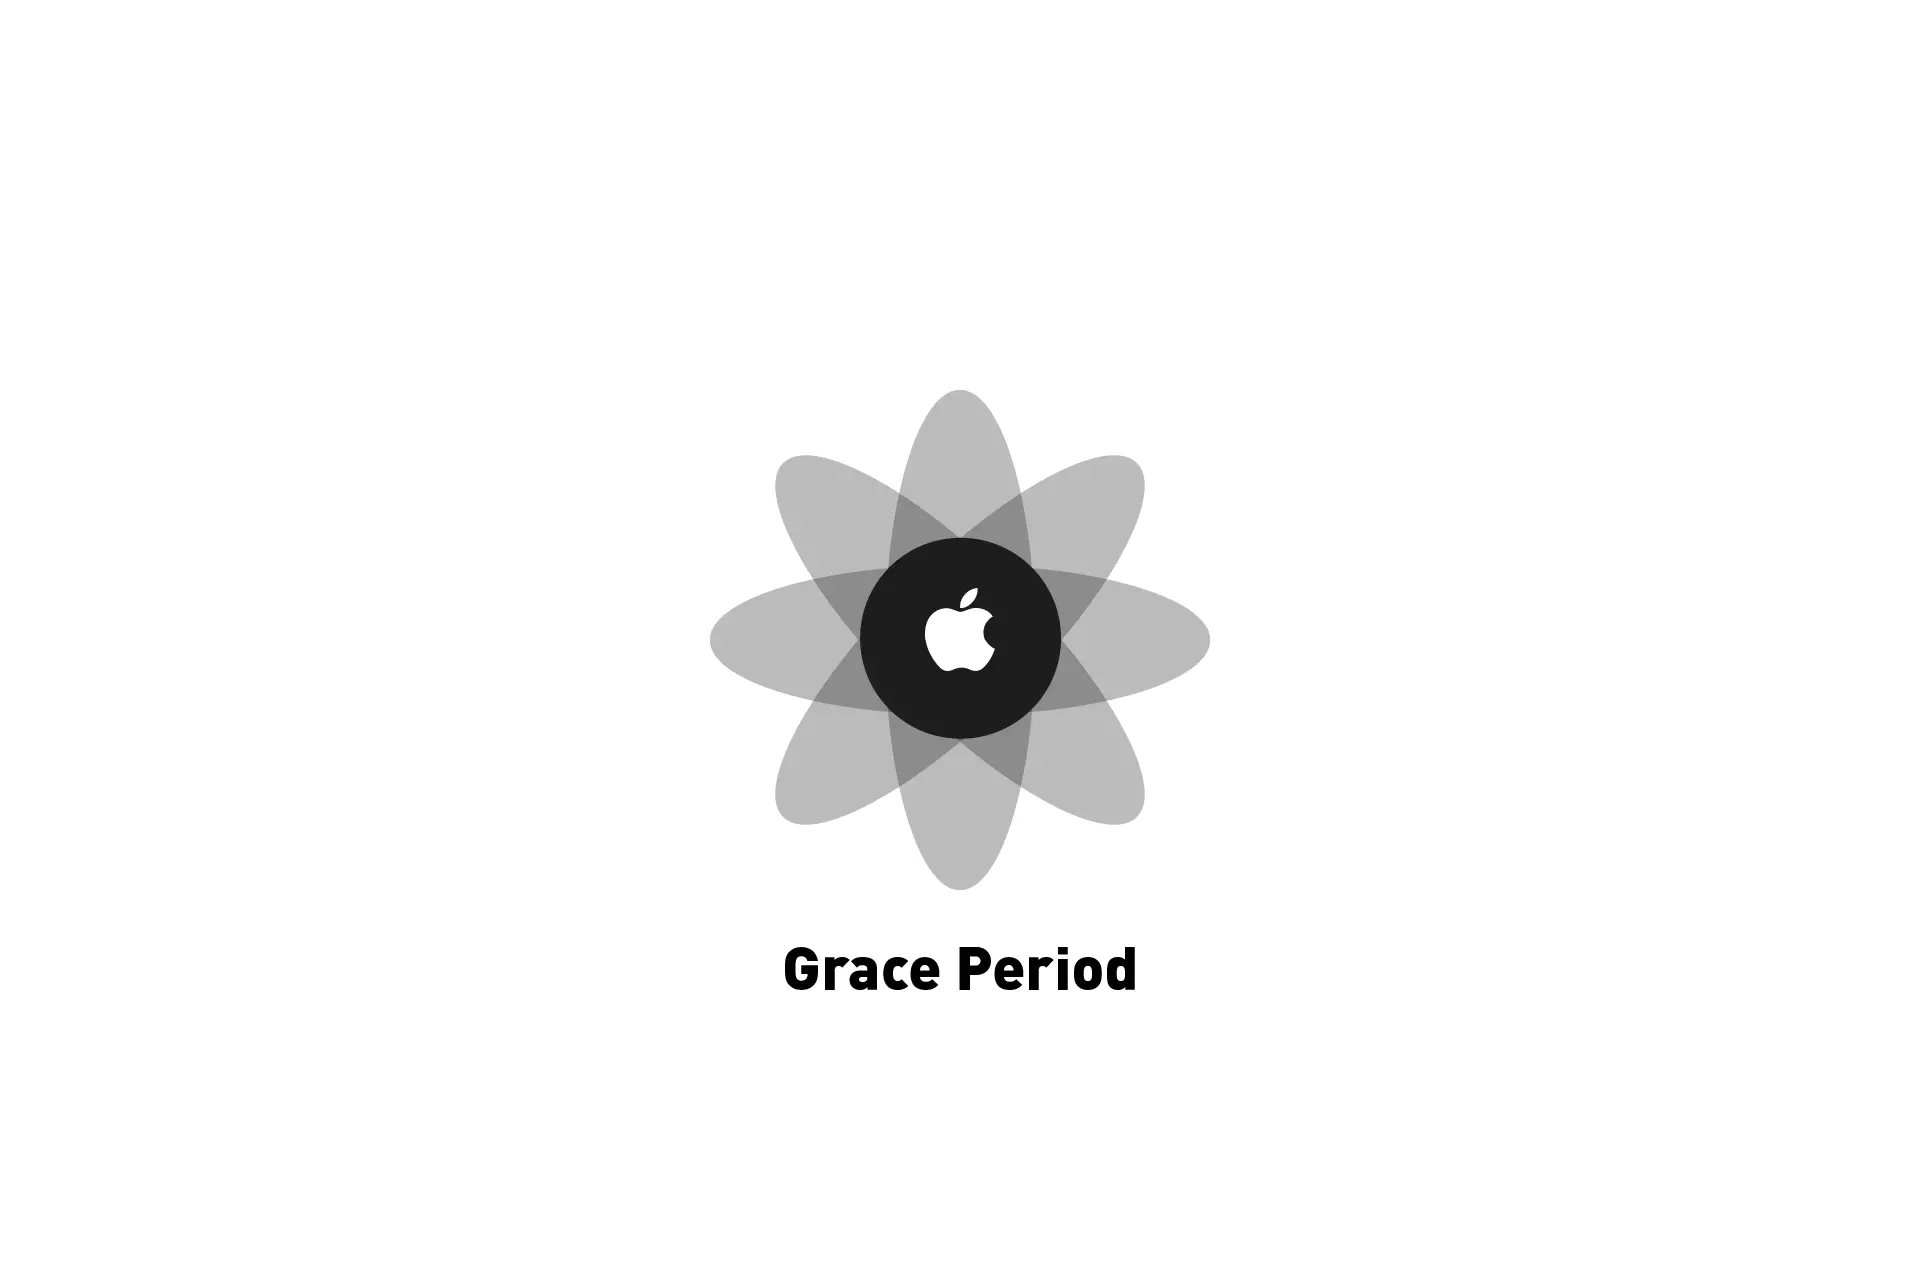 A flower that represents Apple with the text "Grace Period" beneath it.